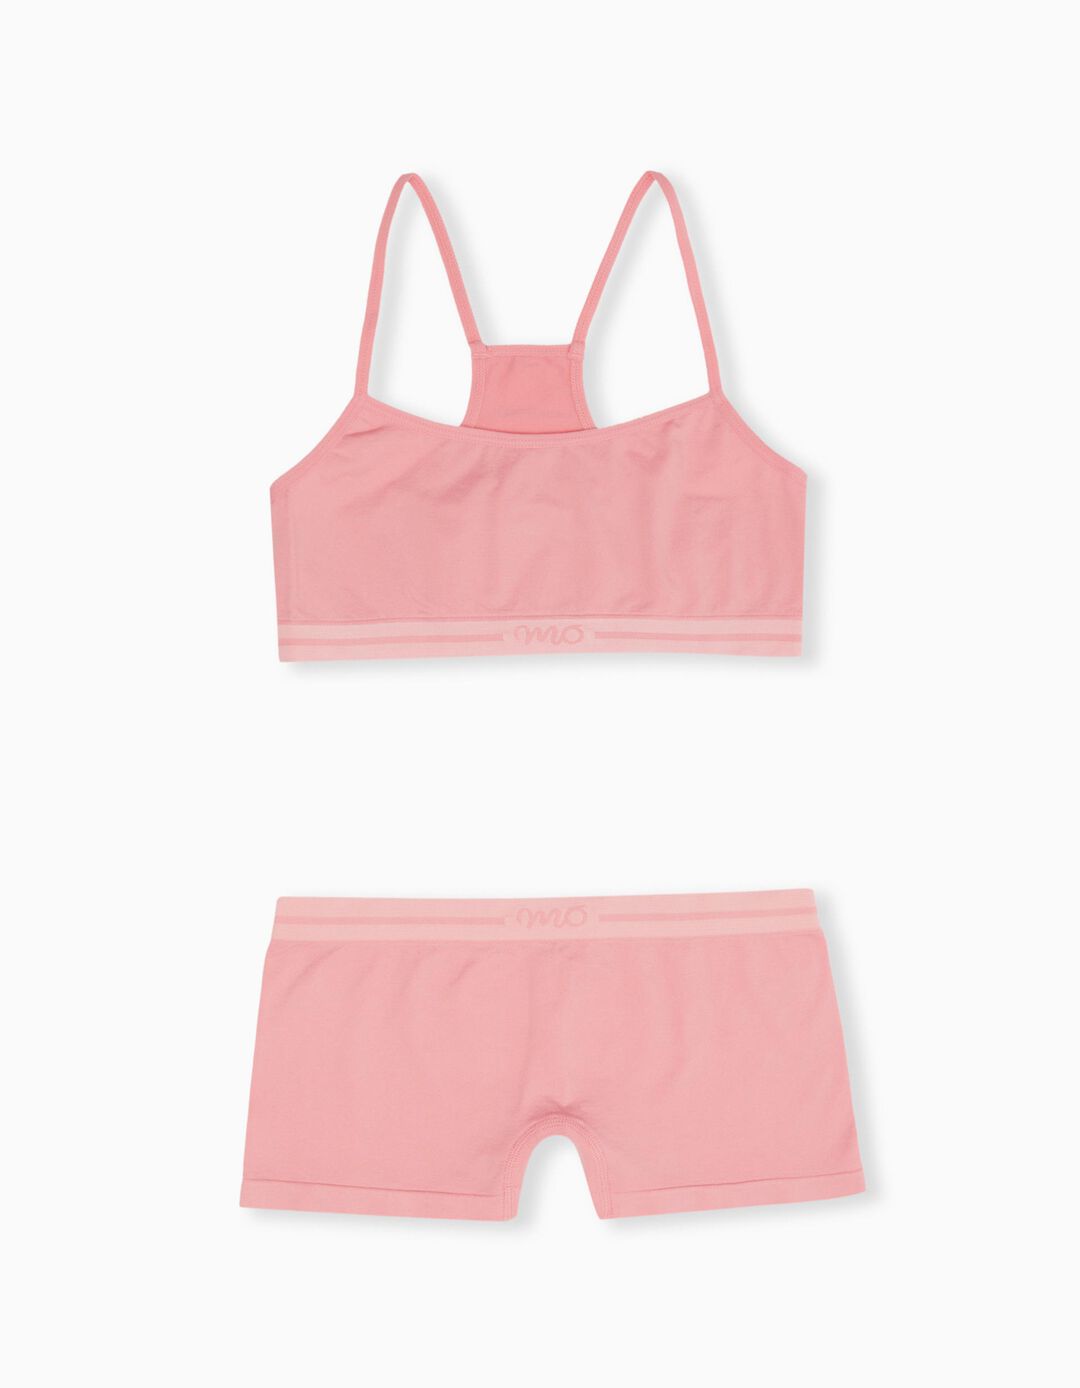 Top + Seamless Boxers Pack, Girls, Light Pink